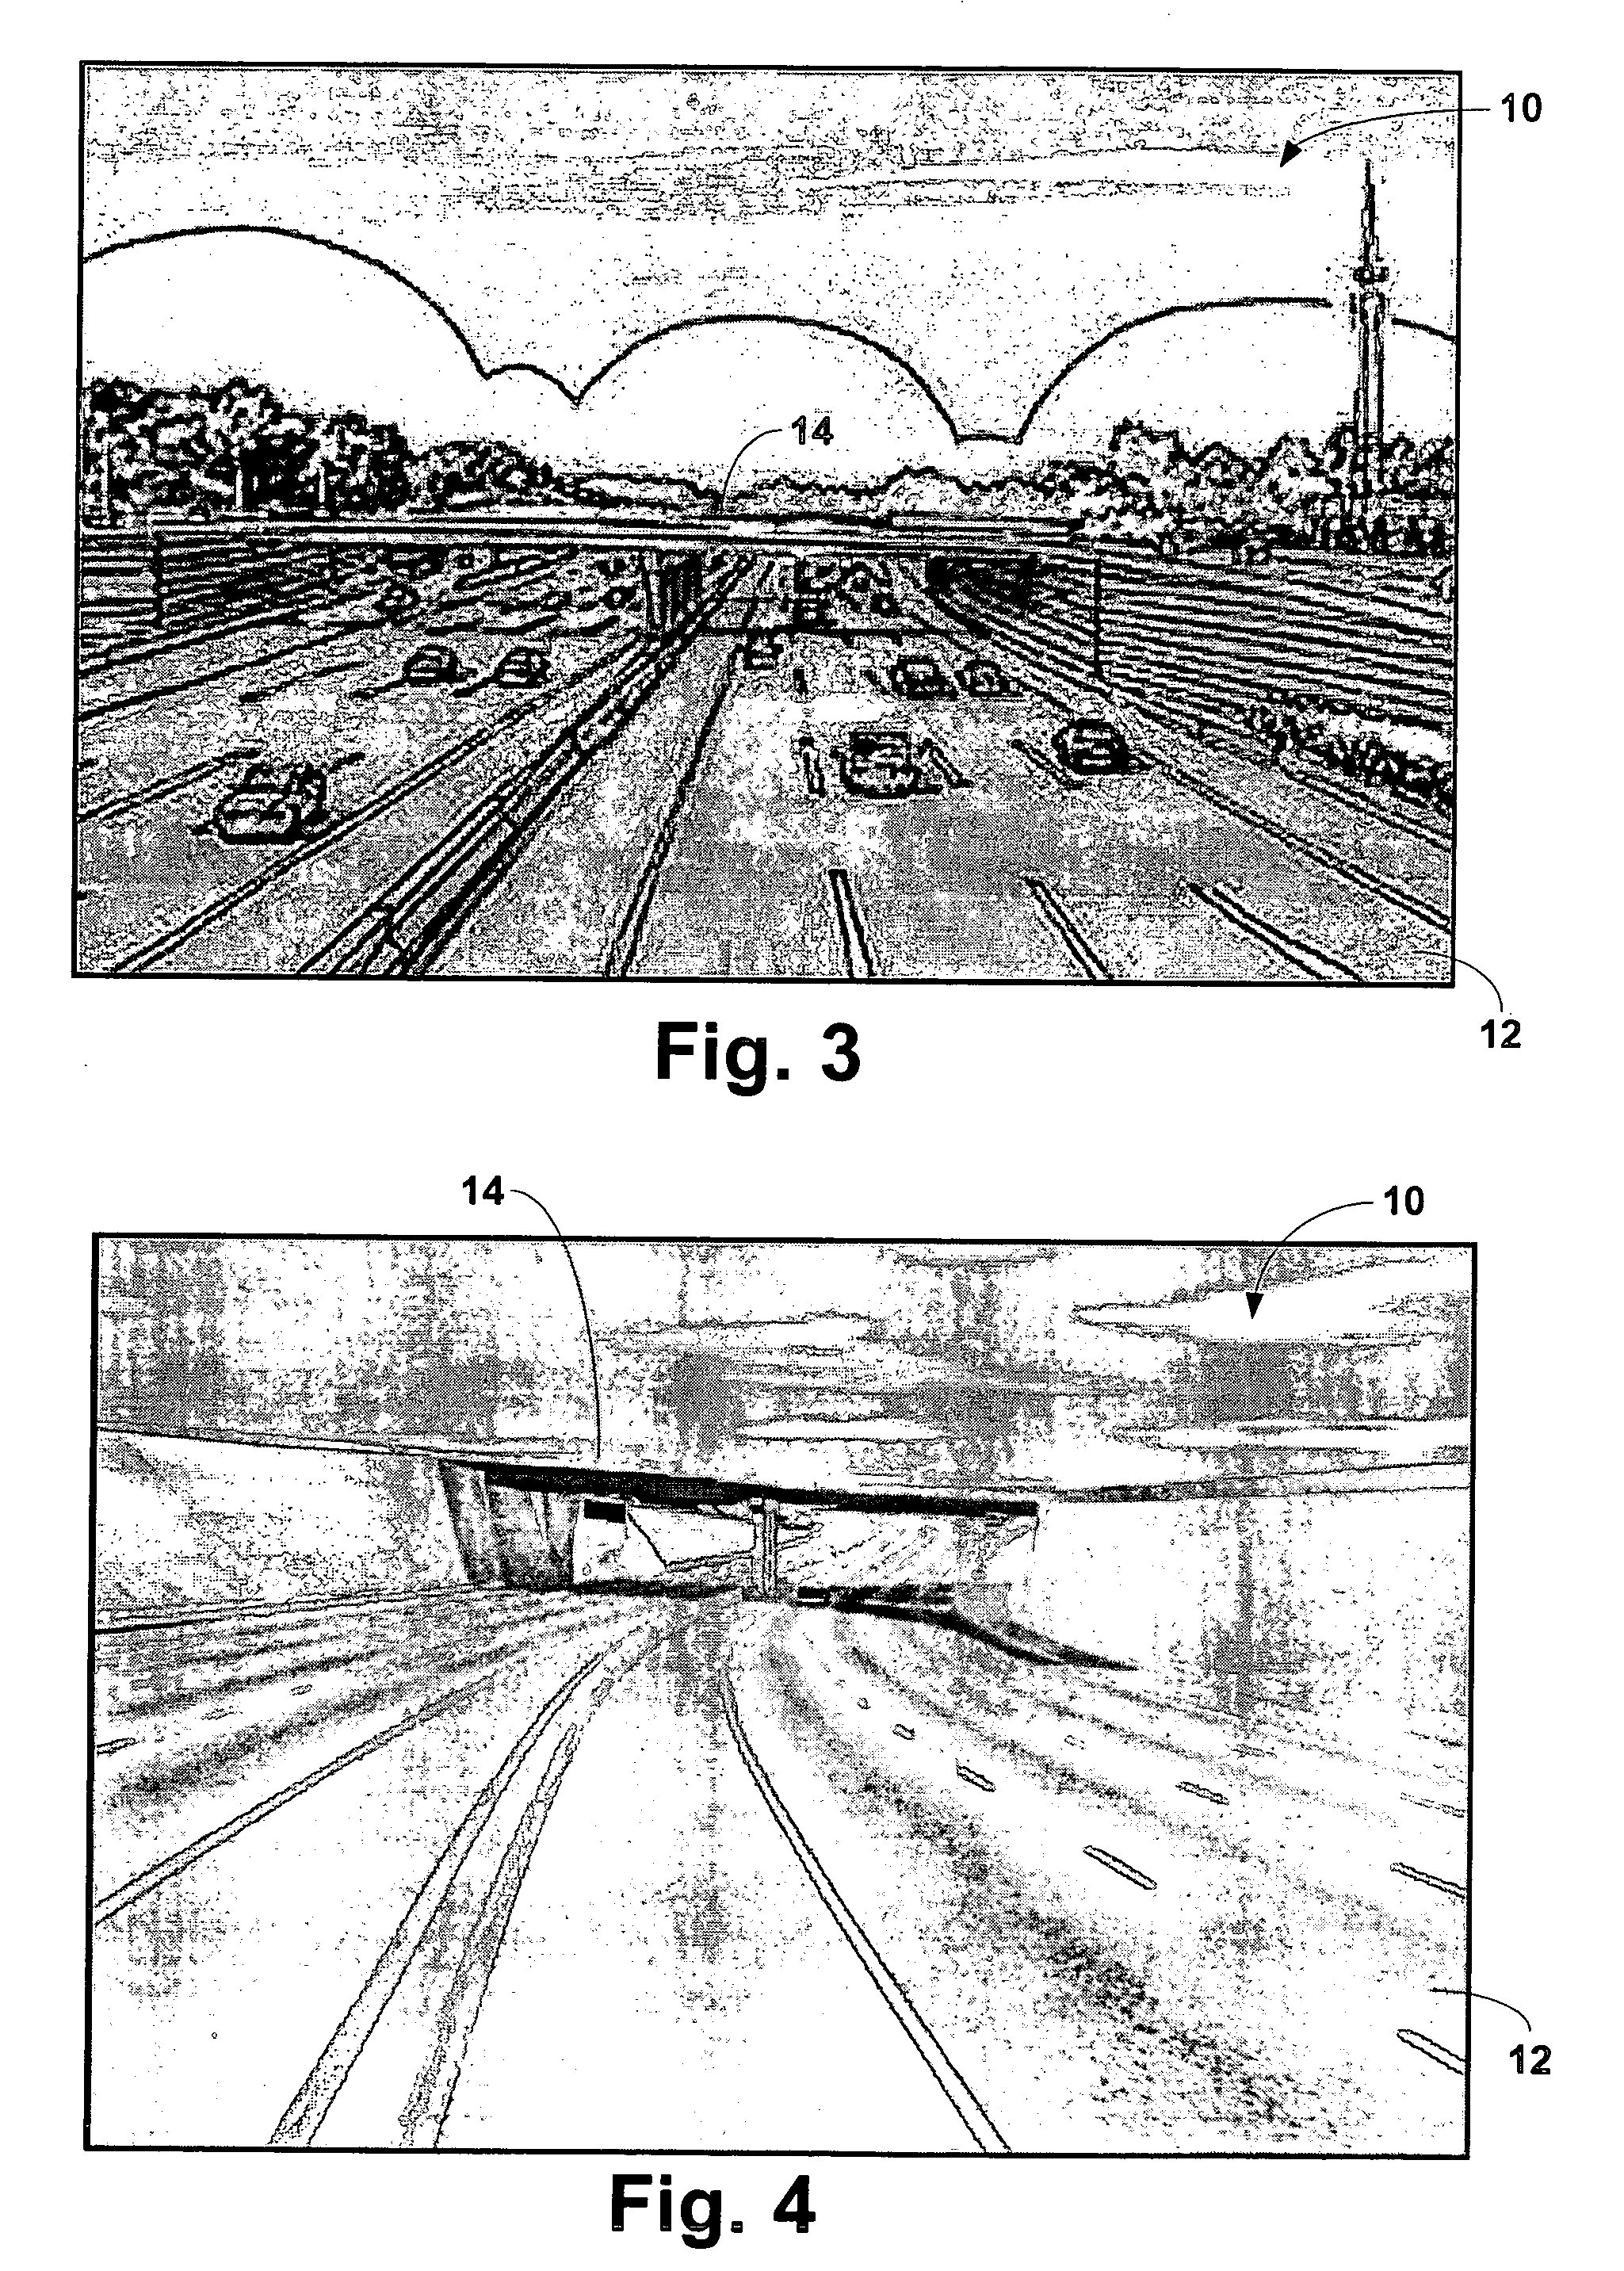 Method and system for converting engineering data into 3D modeling data